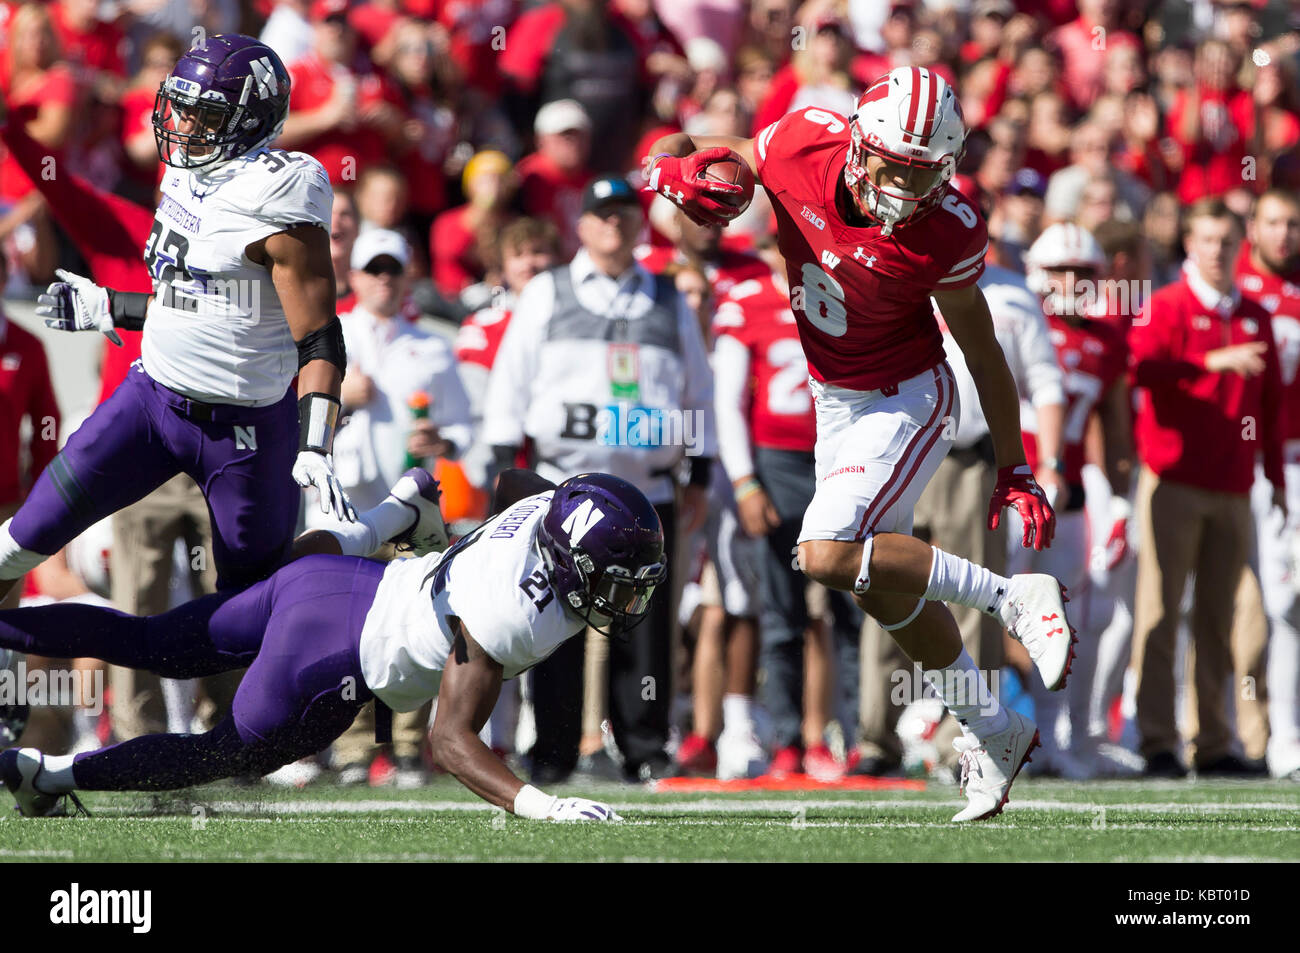 Madison, WI, USA. 30th Sep, 2017. Wisconsin Badgers wide receiver Danny Davis III #6 runs after the catch during the NCAA Football game between the Northwestern Wildcats and the Wisconsin Badgers at Camp Randall Stadium in Madison, WI. Wisconsin defeated Northwestern 33-24. John Fisher/CSM/Alamy Live News Stock Photo